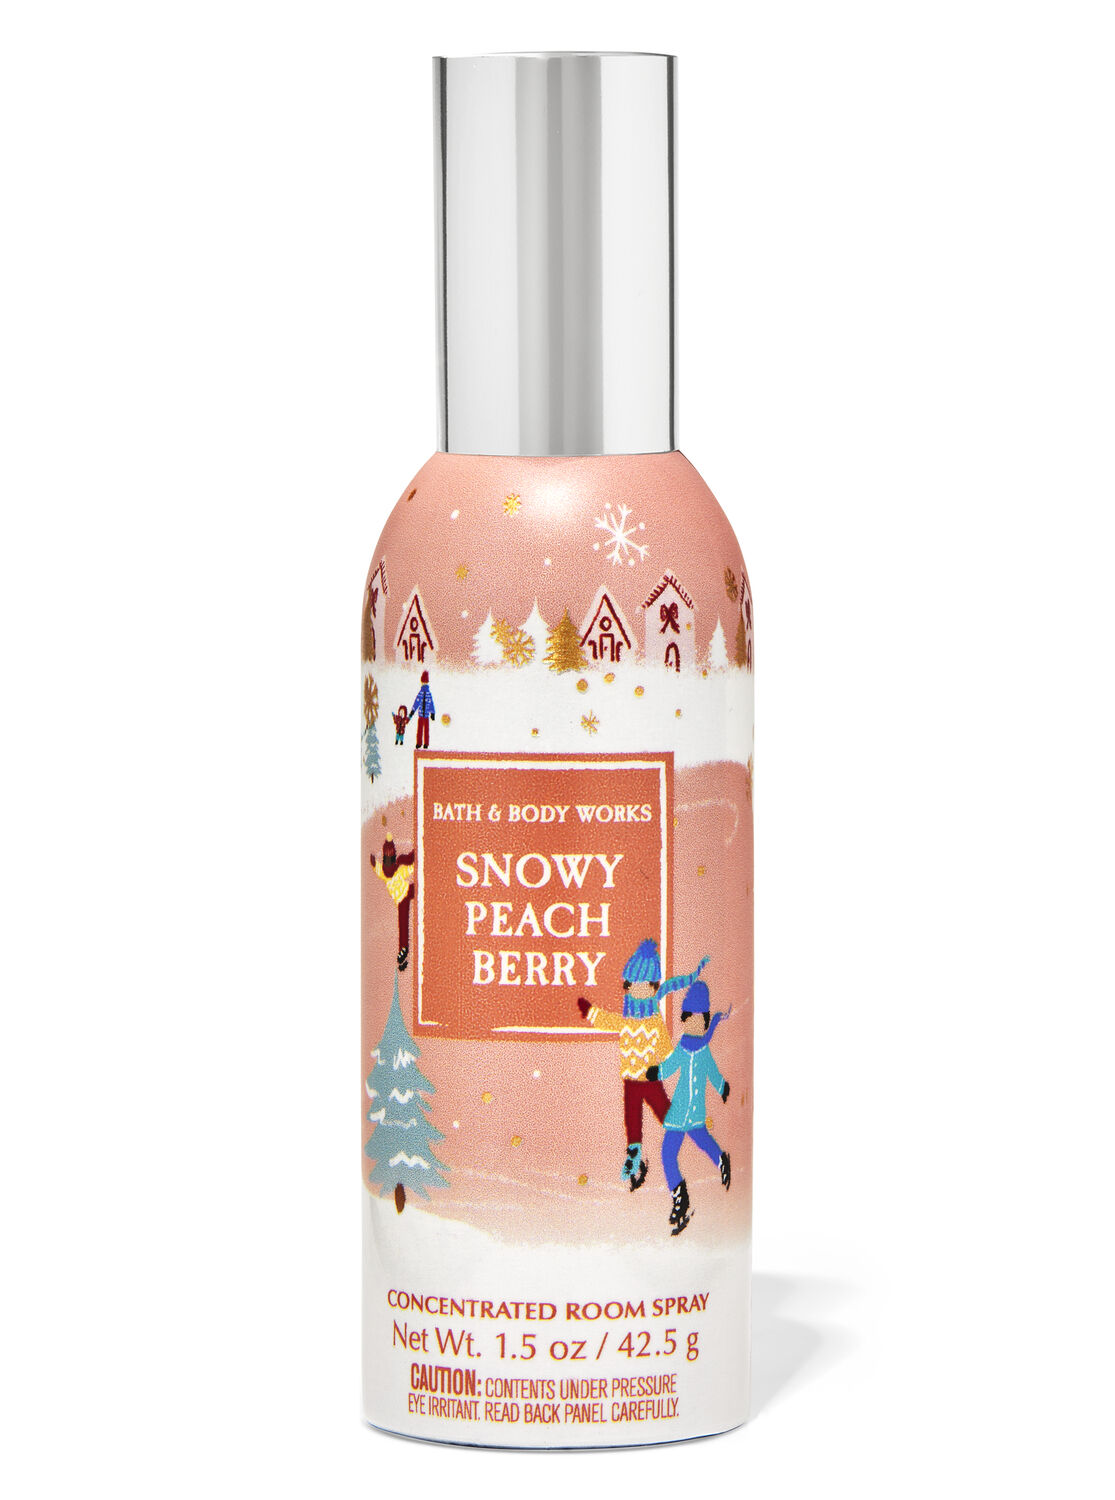 Snowy Peach Berry Concentrated Room Spray